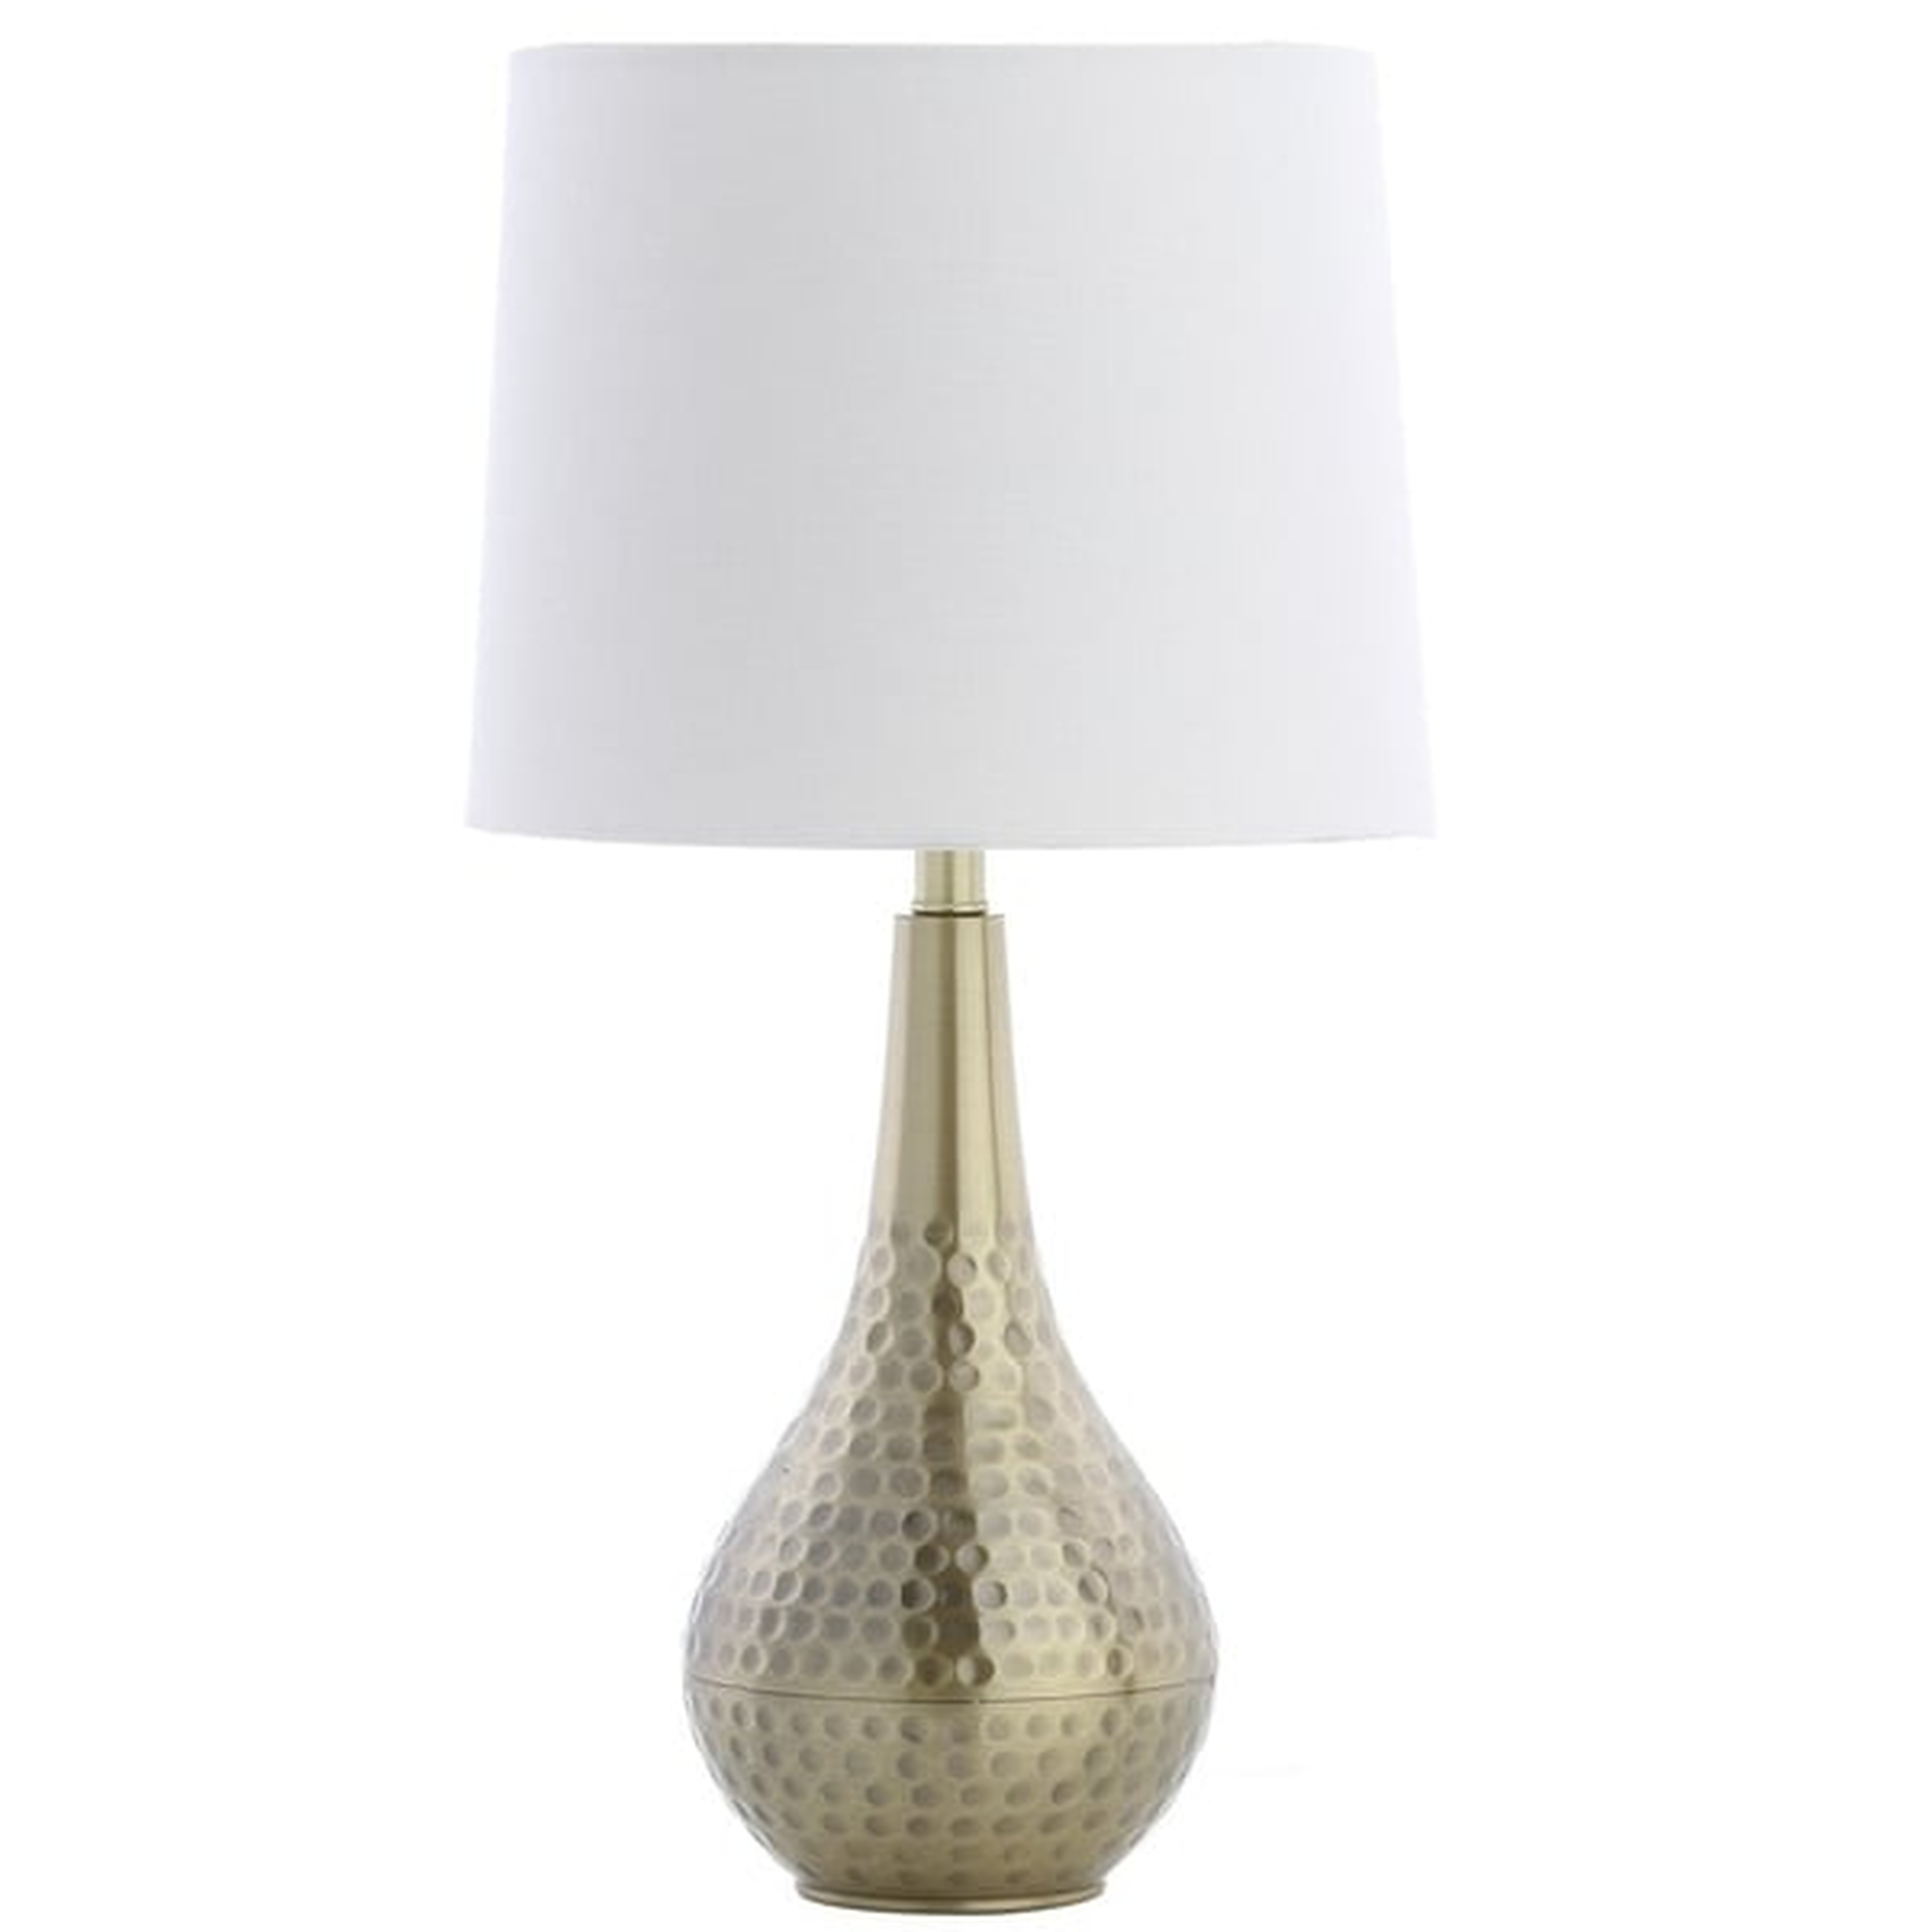 Medford Table Lamp, Brass Gold - Arlo Home